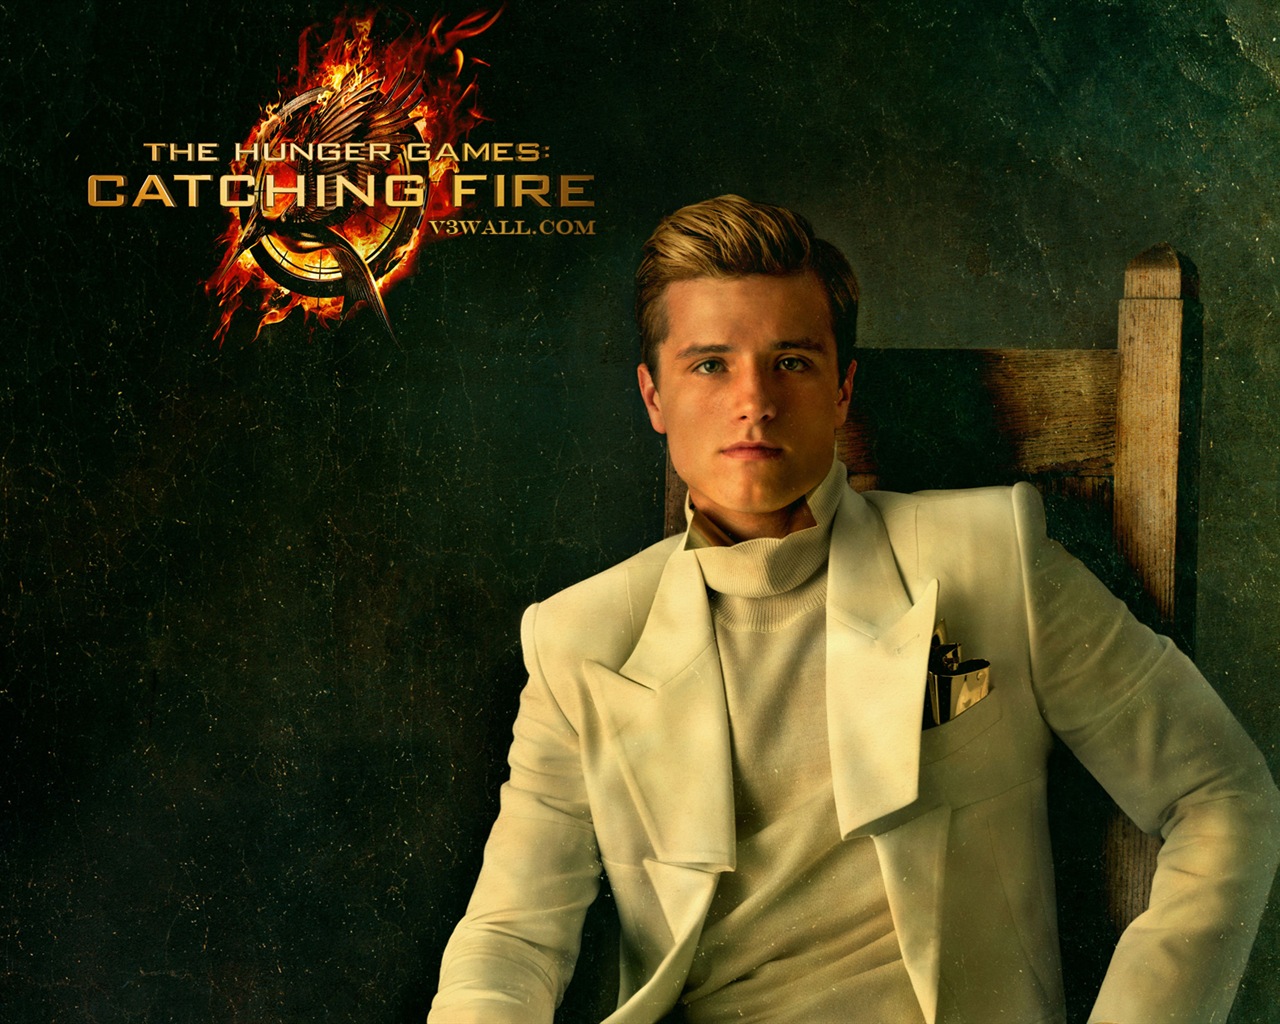 The Hunger Games: Catching Fire wallpapers HD #18 - 1280x1024